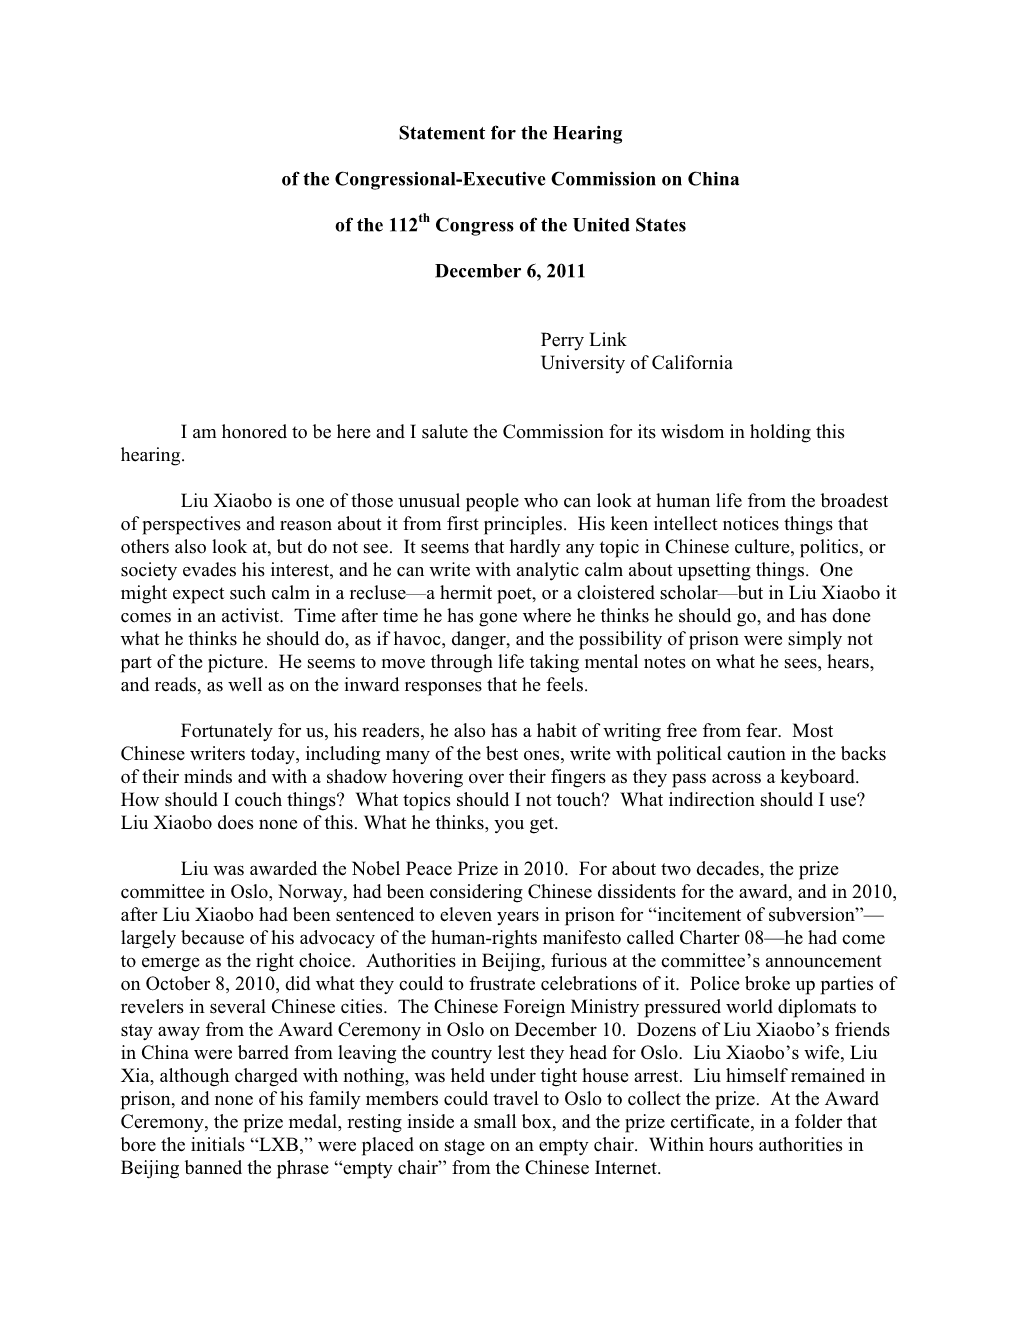 Statement for the Hearing of the Congressional-Executive